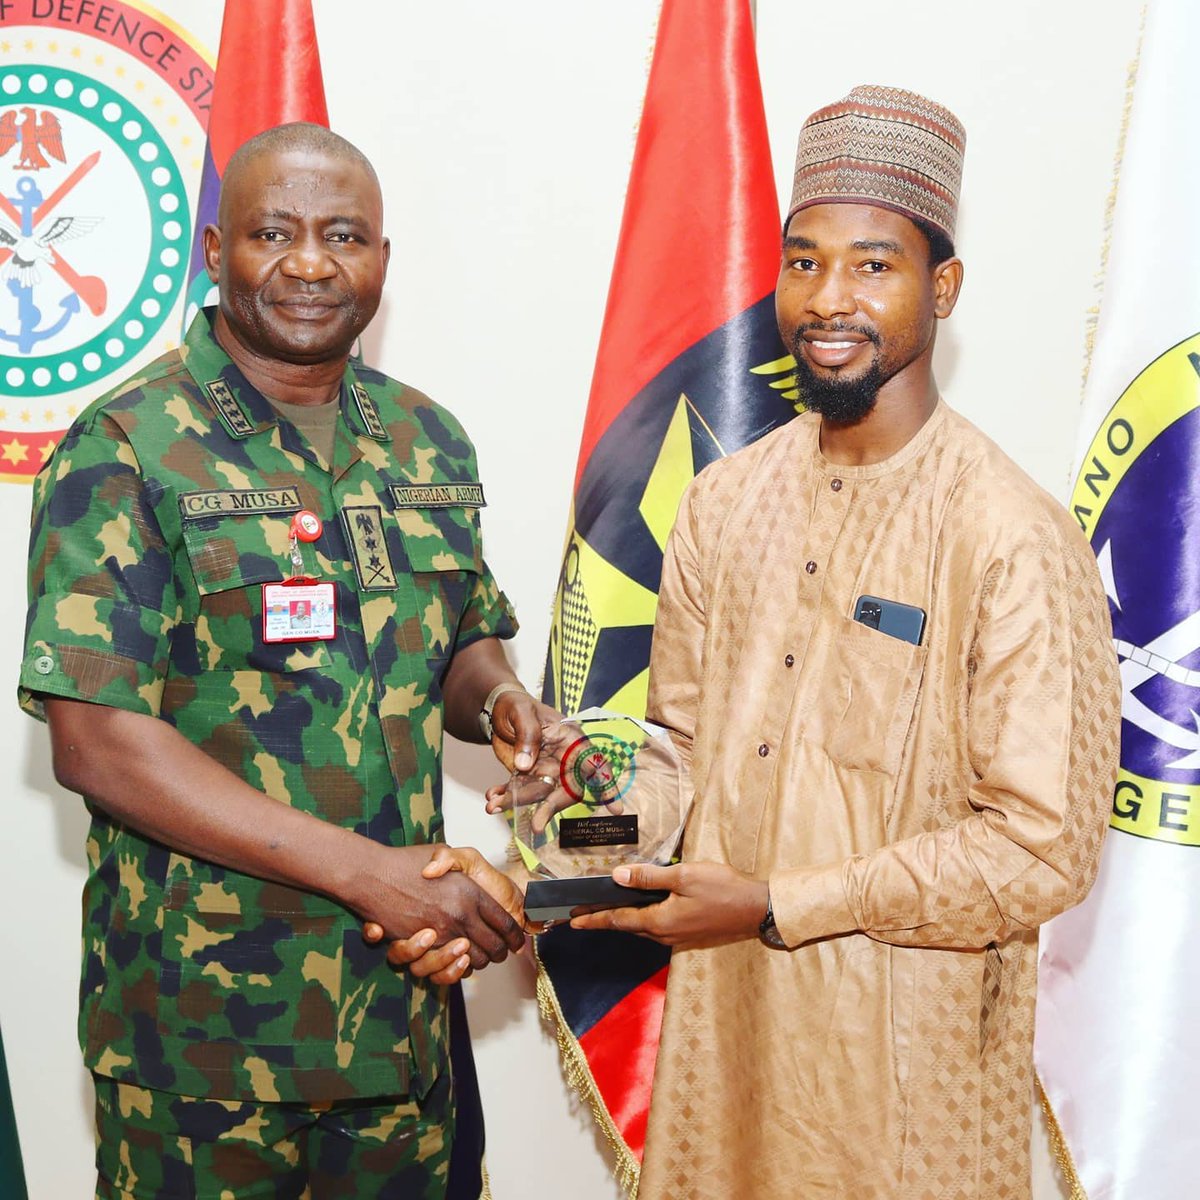 I'm honored to have received commendation from Gen. CG Musa, the Chief of Defence Staff, Federal Republic of Nigeria, recognizing the impact of our work on the lives of ordinary citizens and its contribution to nation-building...